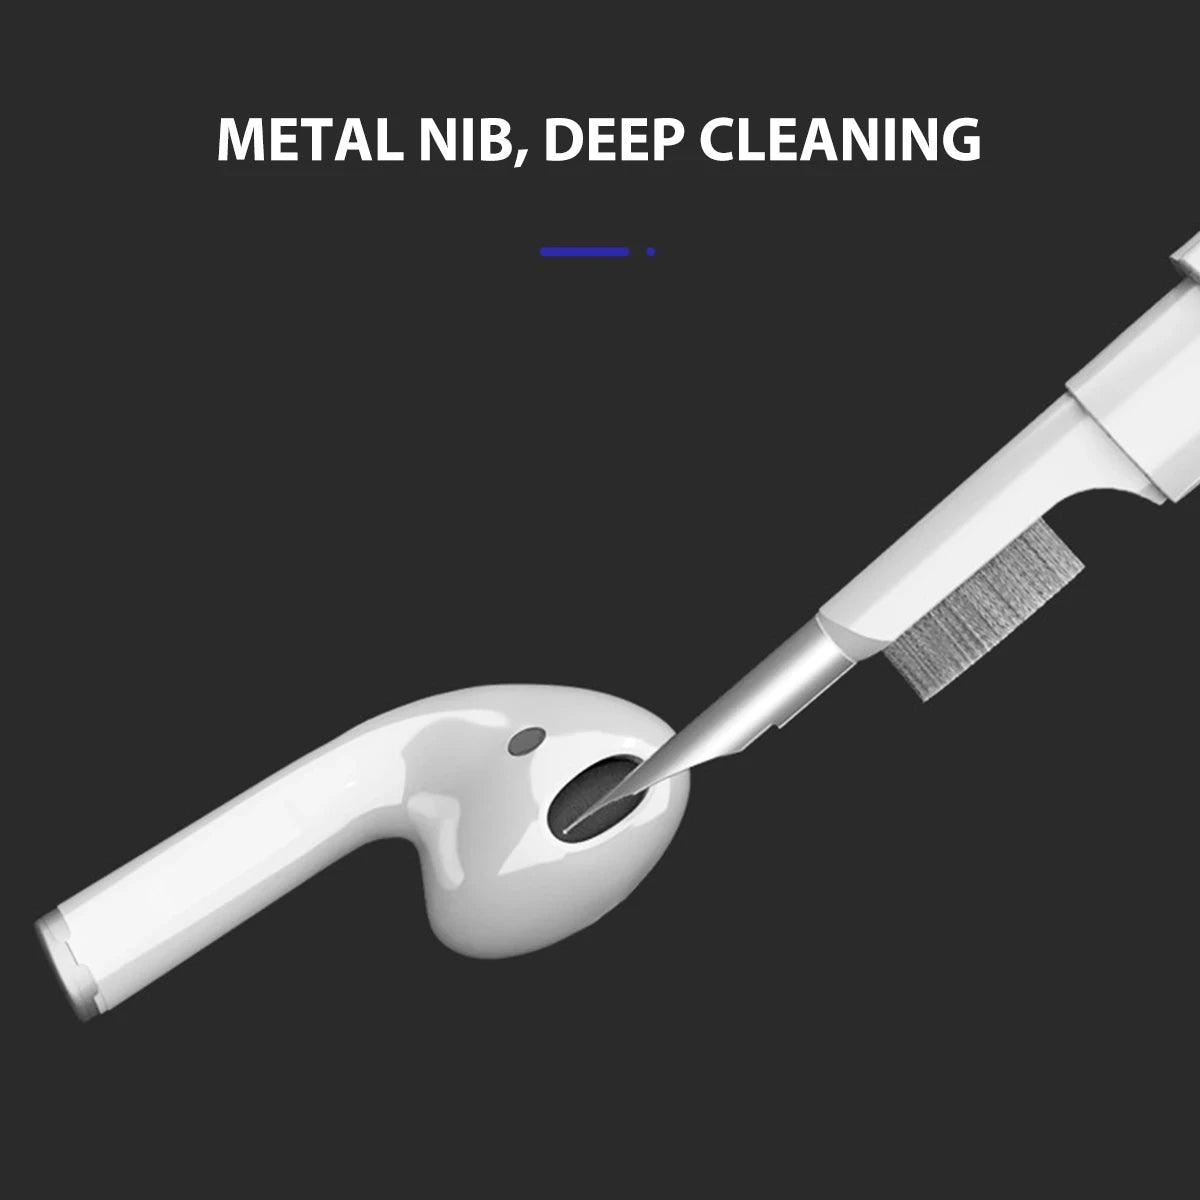 Universal Earbuds Cleaning Tool - Works for Airpods, Xiaomi & iPhone Earbuds